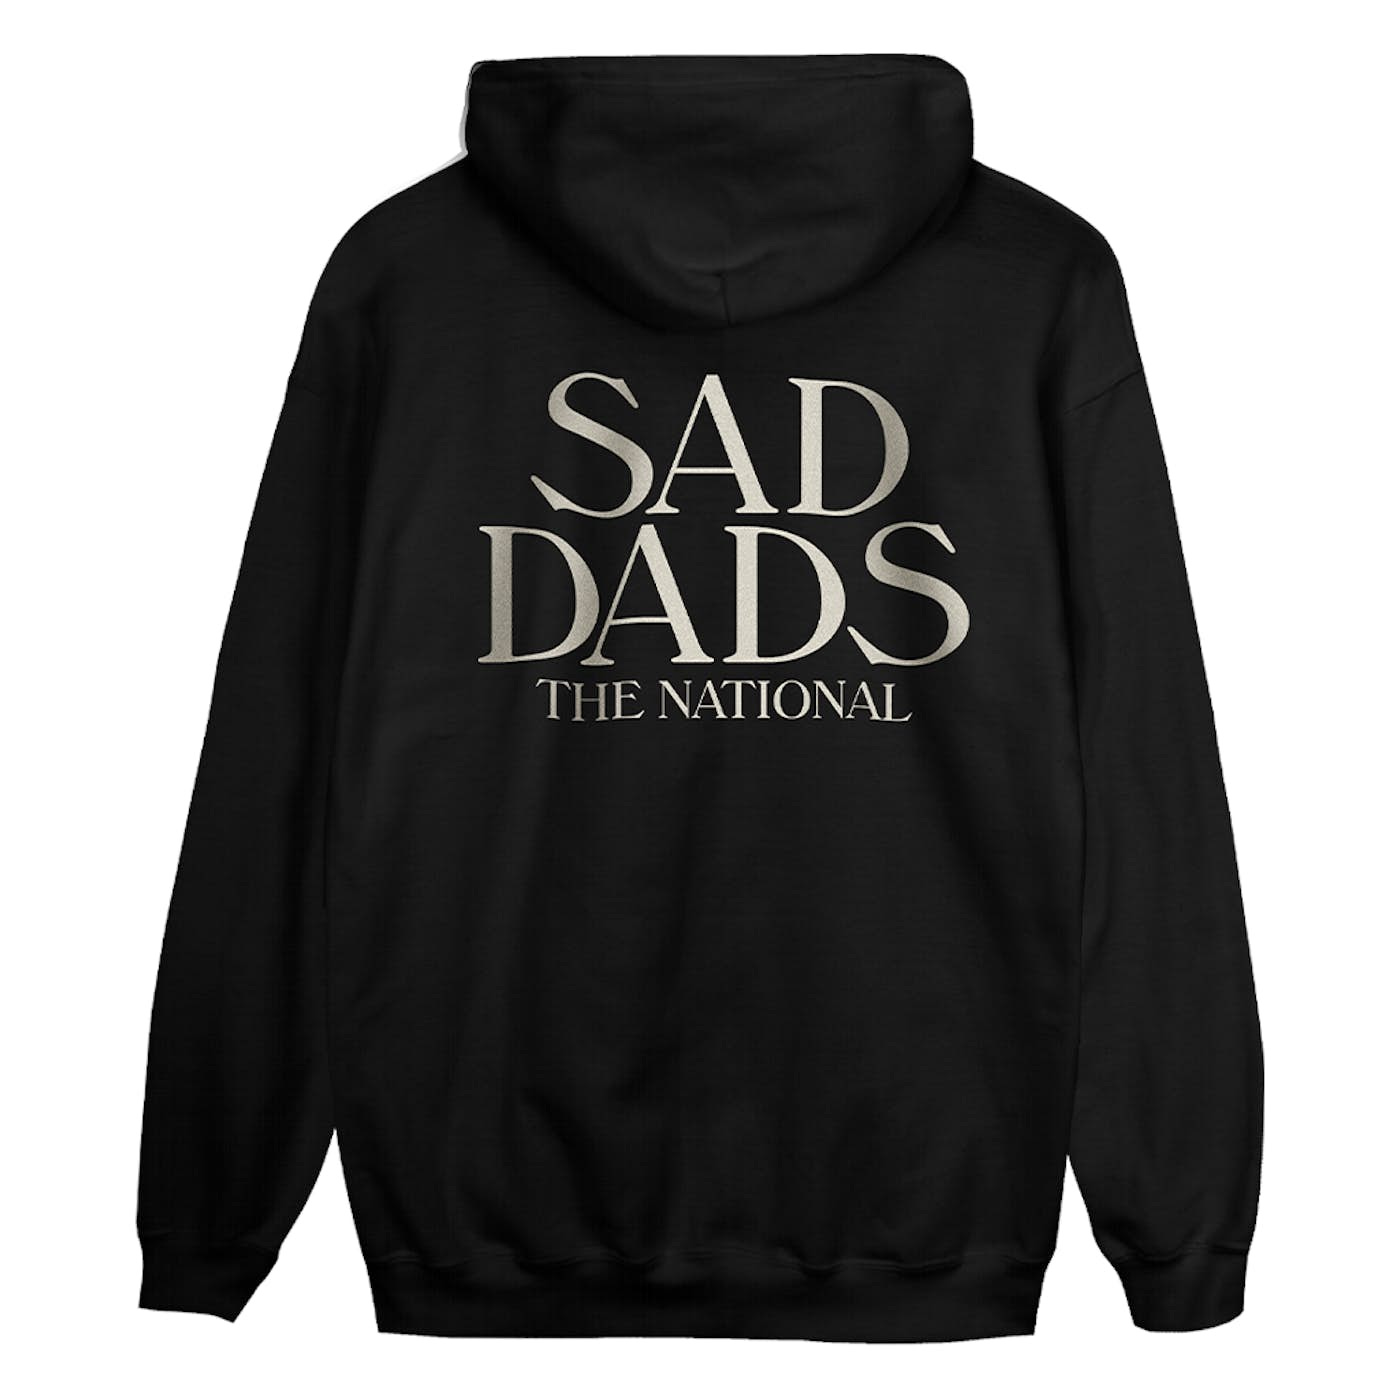 Image of official 'Sad Dads' hoodie from The National